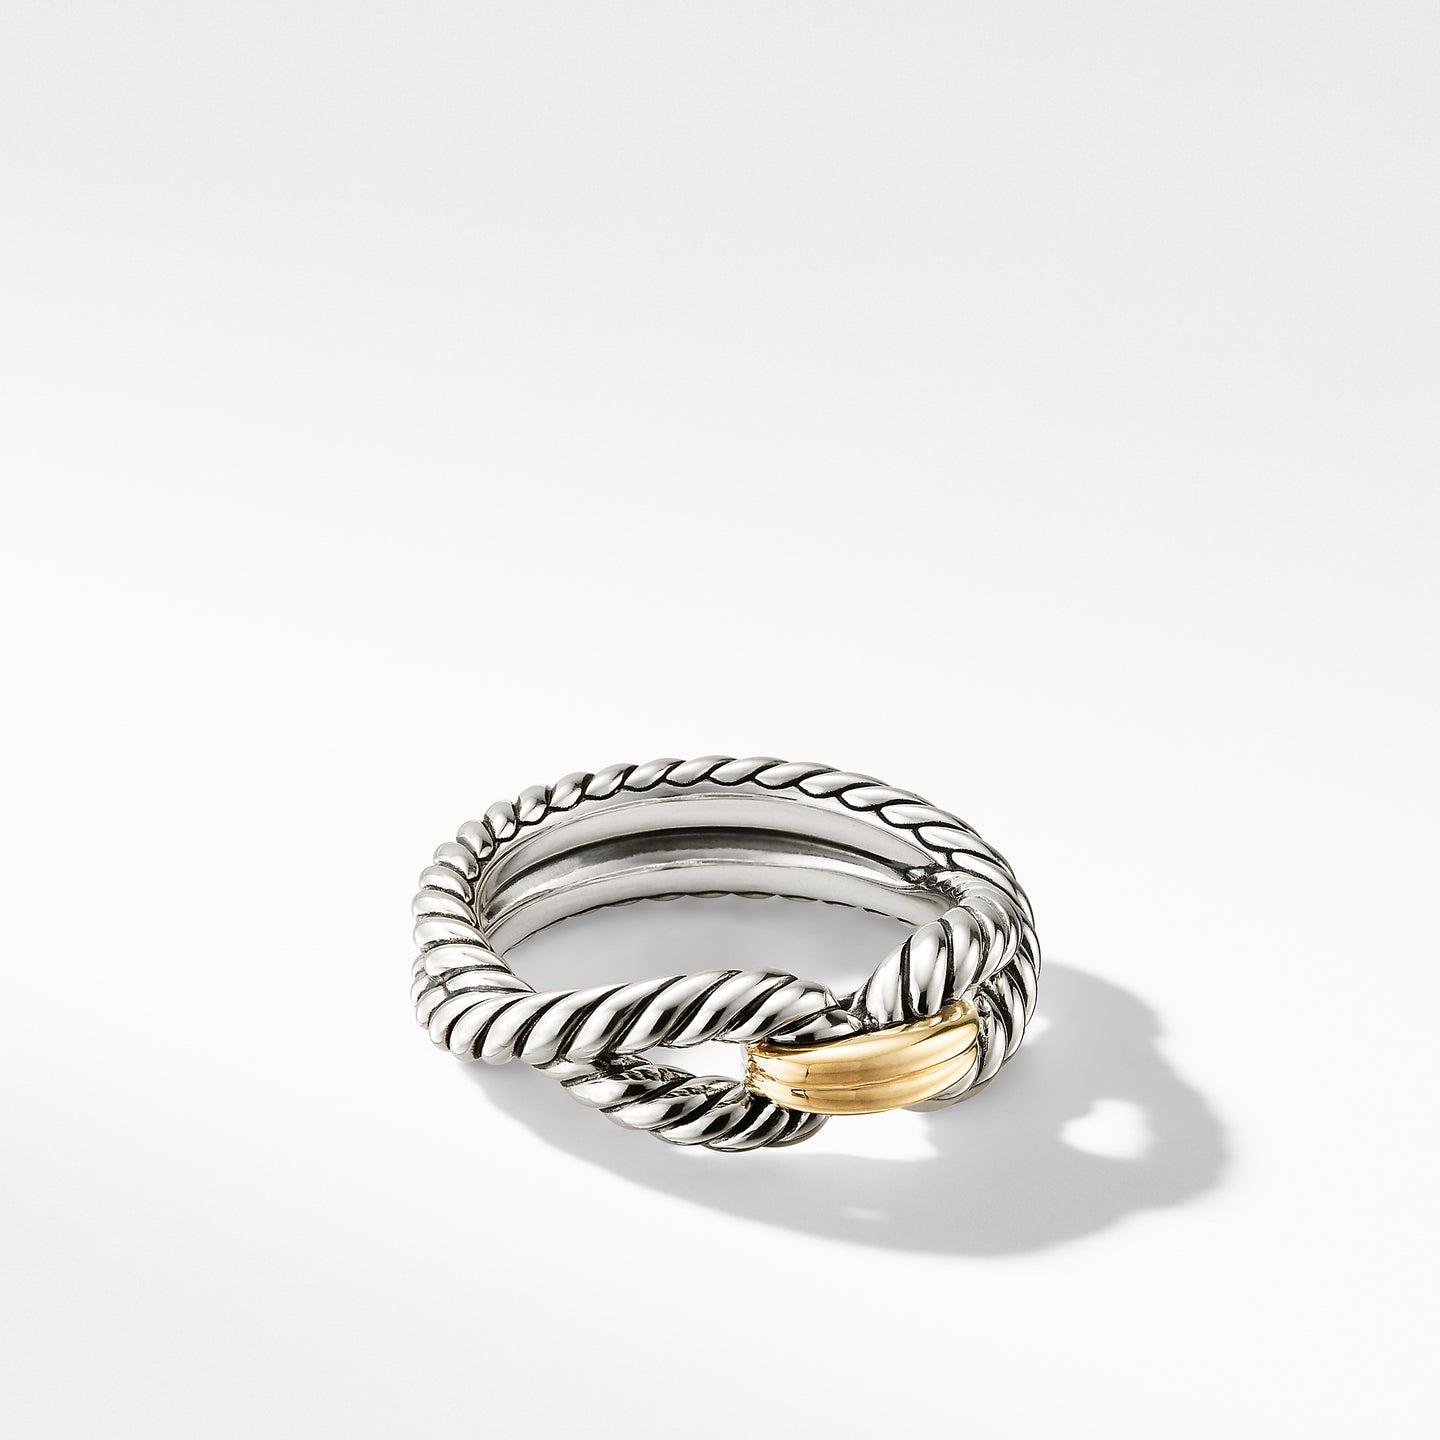 David Yurman The Crossover Collection Ring in Silver and 18-Karat Yellow Gold